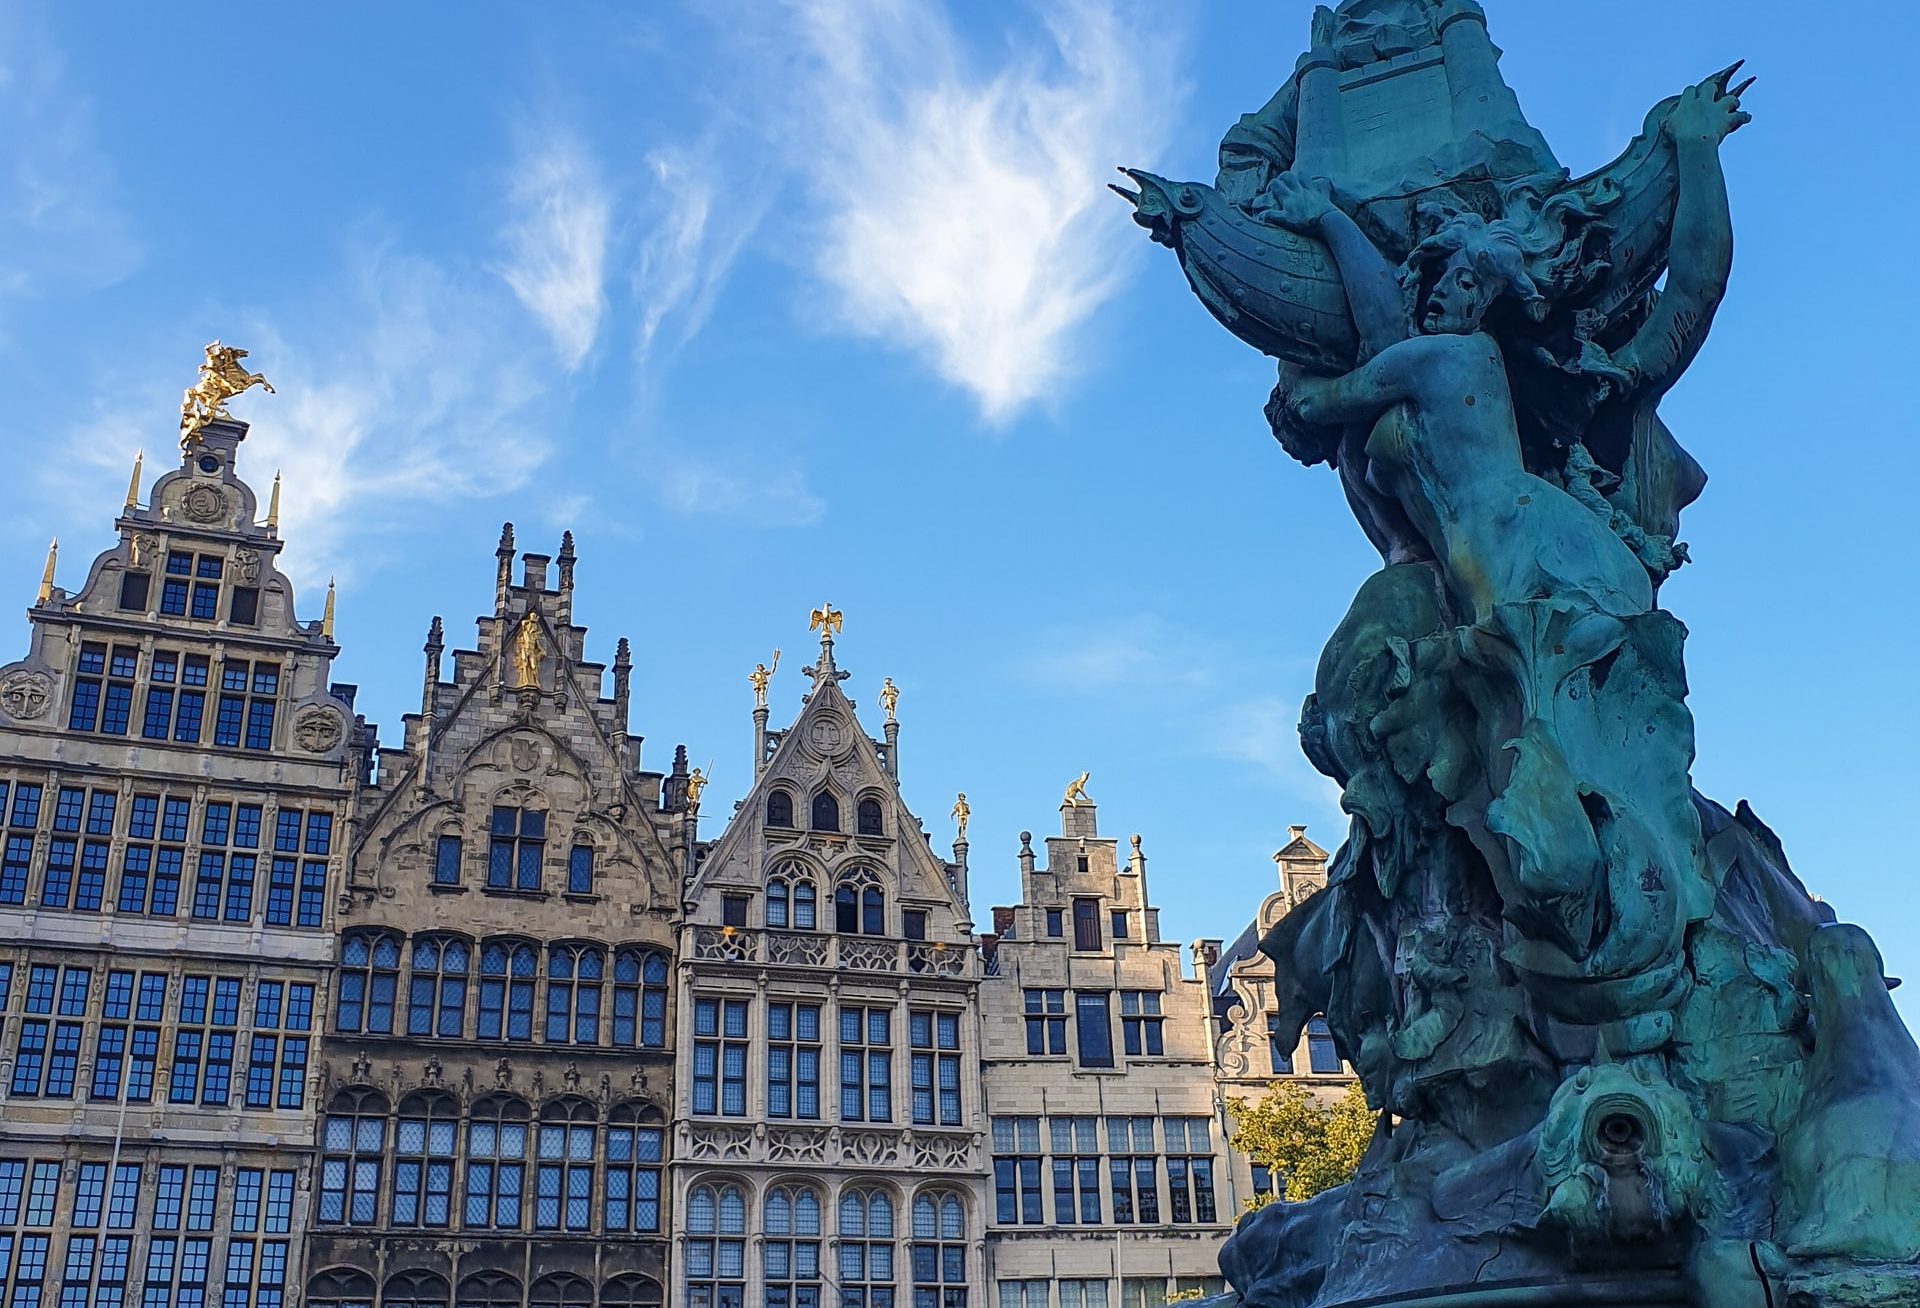 Museums to see in Antwerp